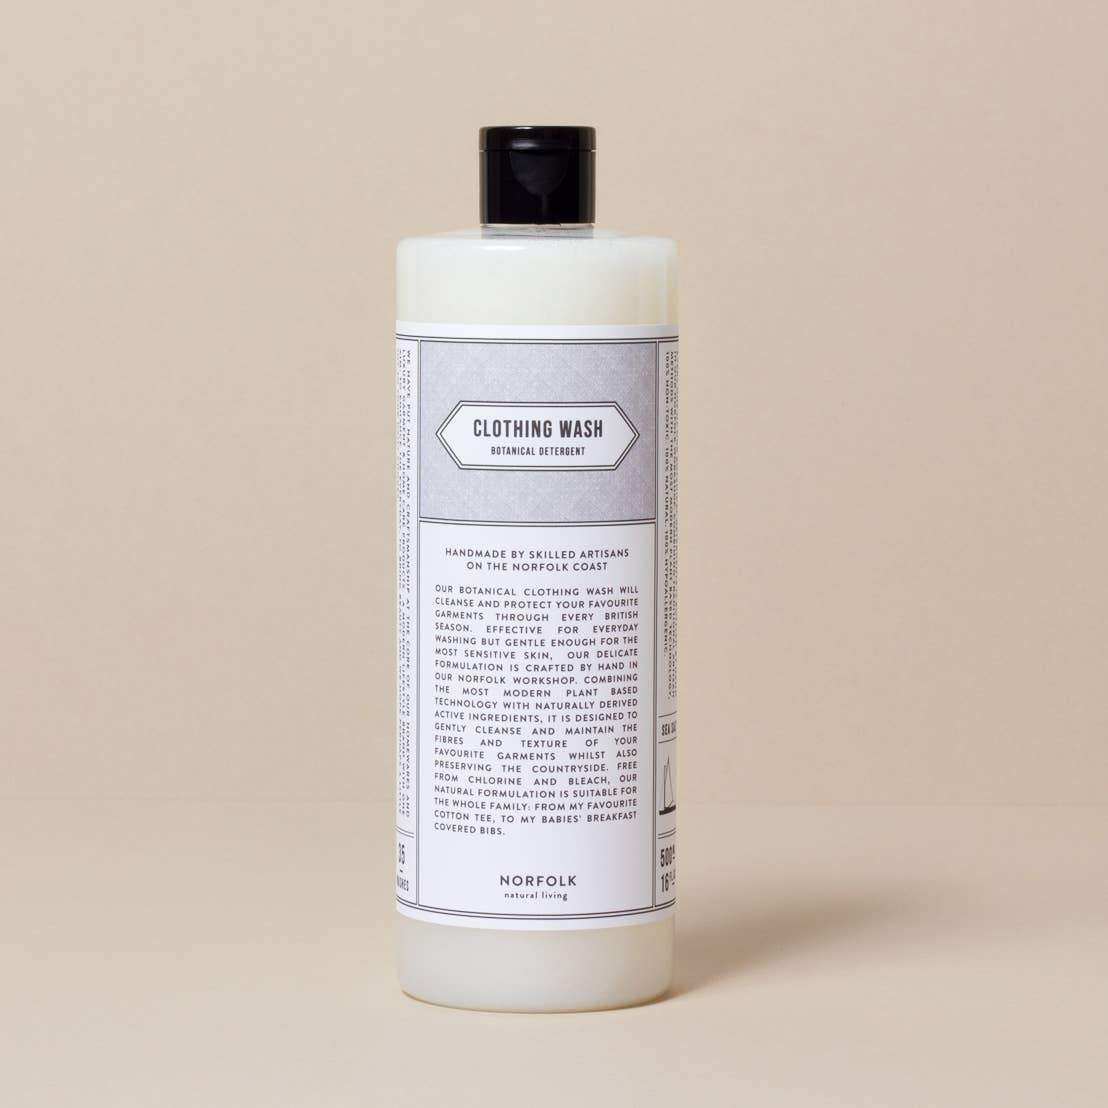 A large white bottle of Norfolk Natural Living Lavender Laundry Detergent with a black cap, featuring a detailed label, set against a plain beige background.